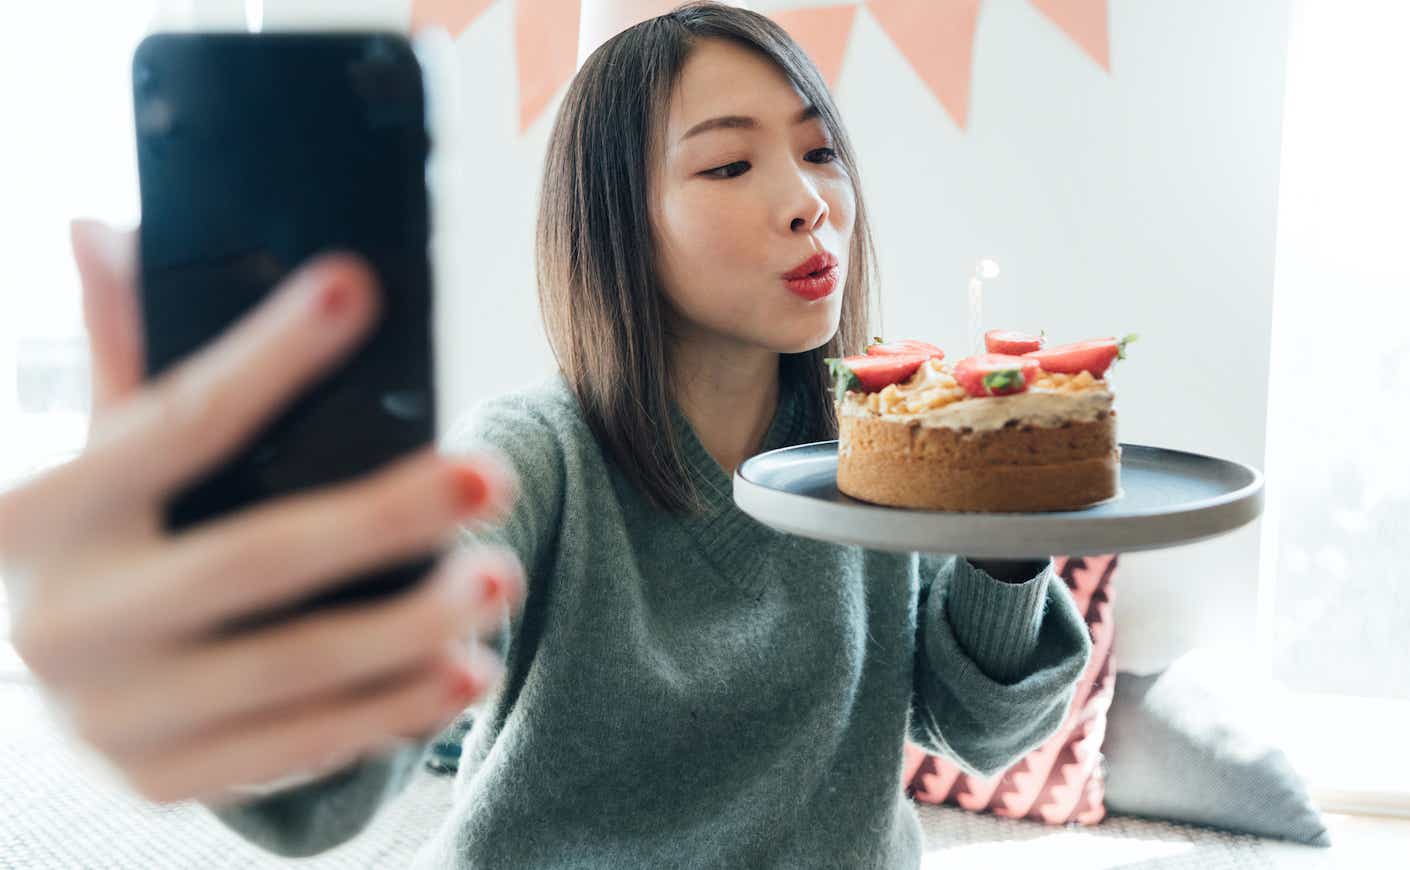 Young Woman Having A Virtual Birthday Party On Video Call With Friends Using Smart Phone